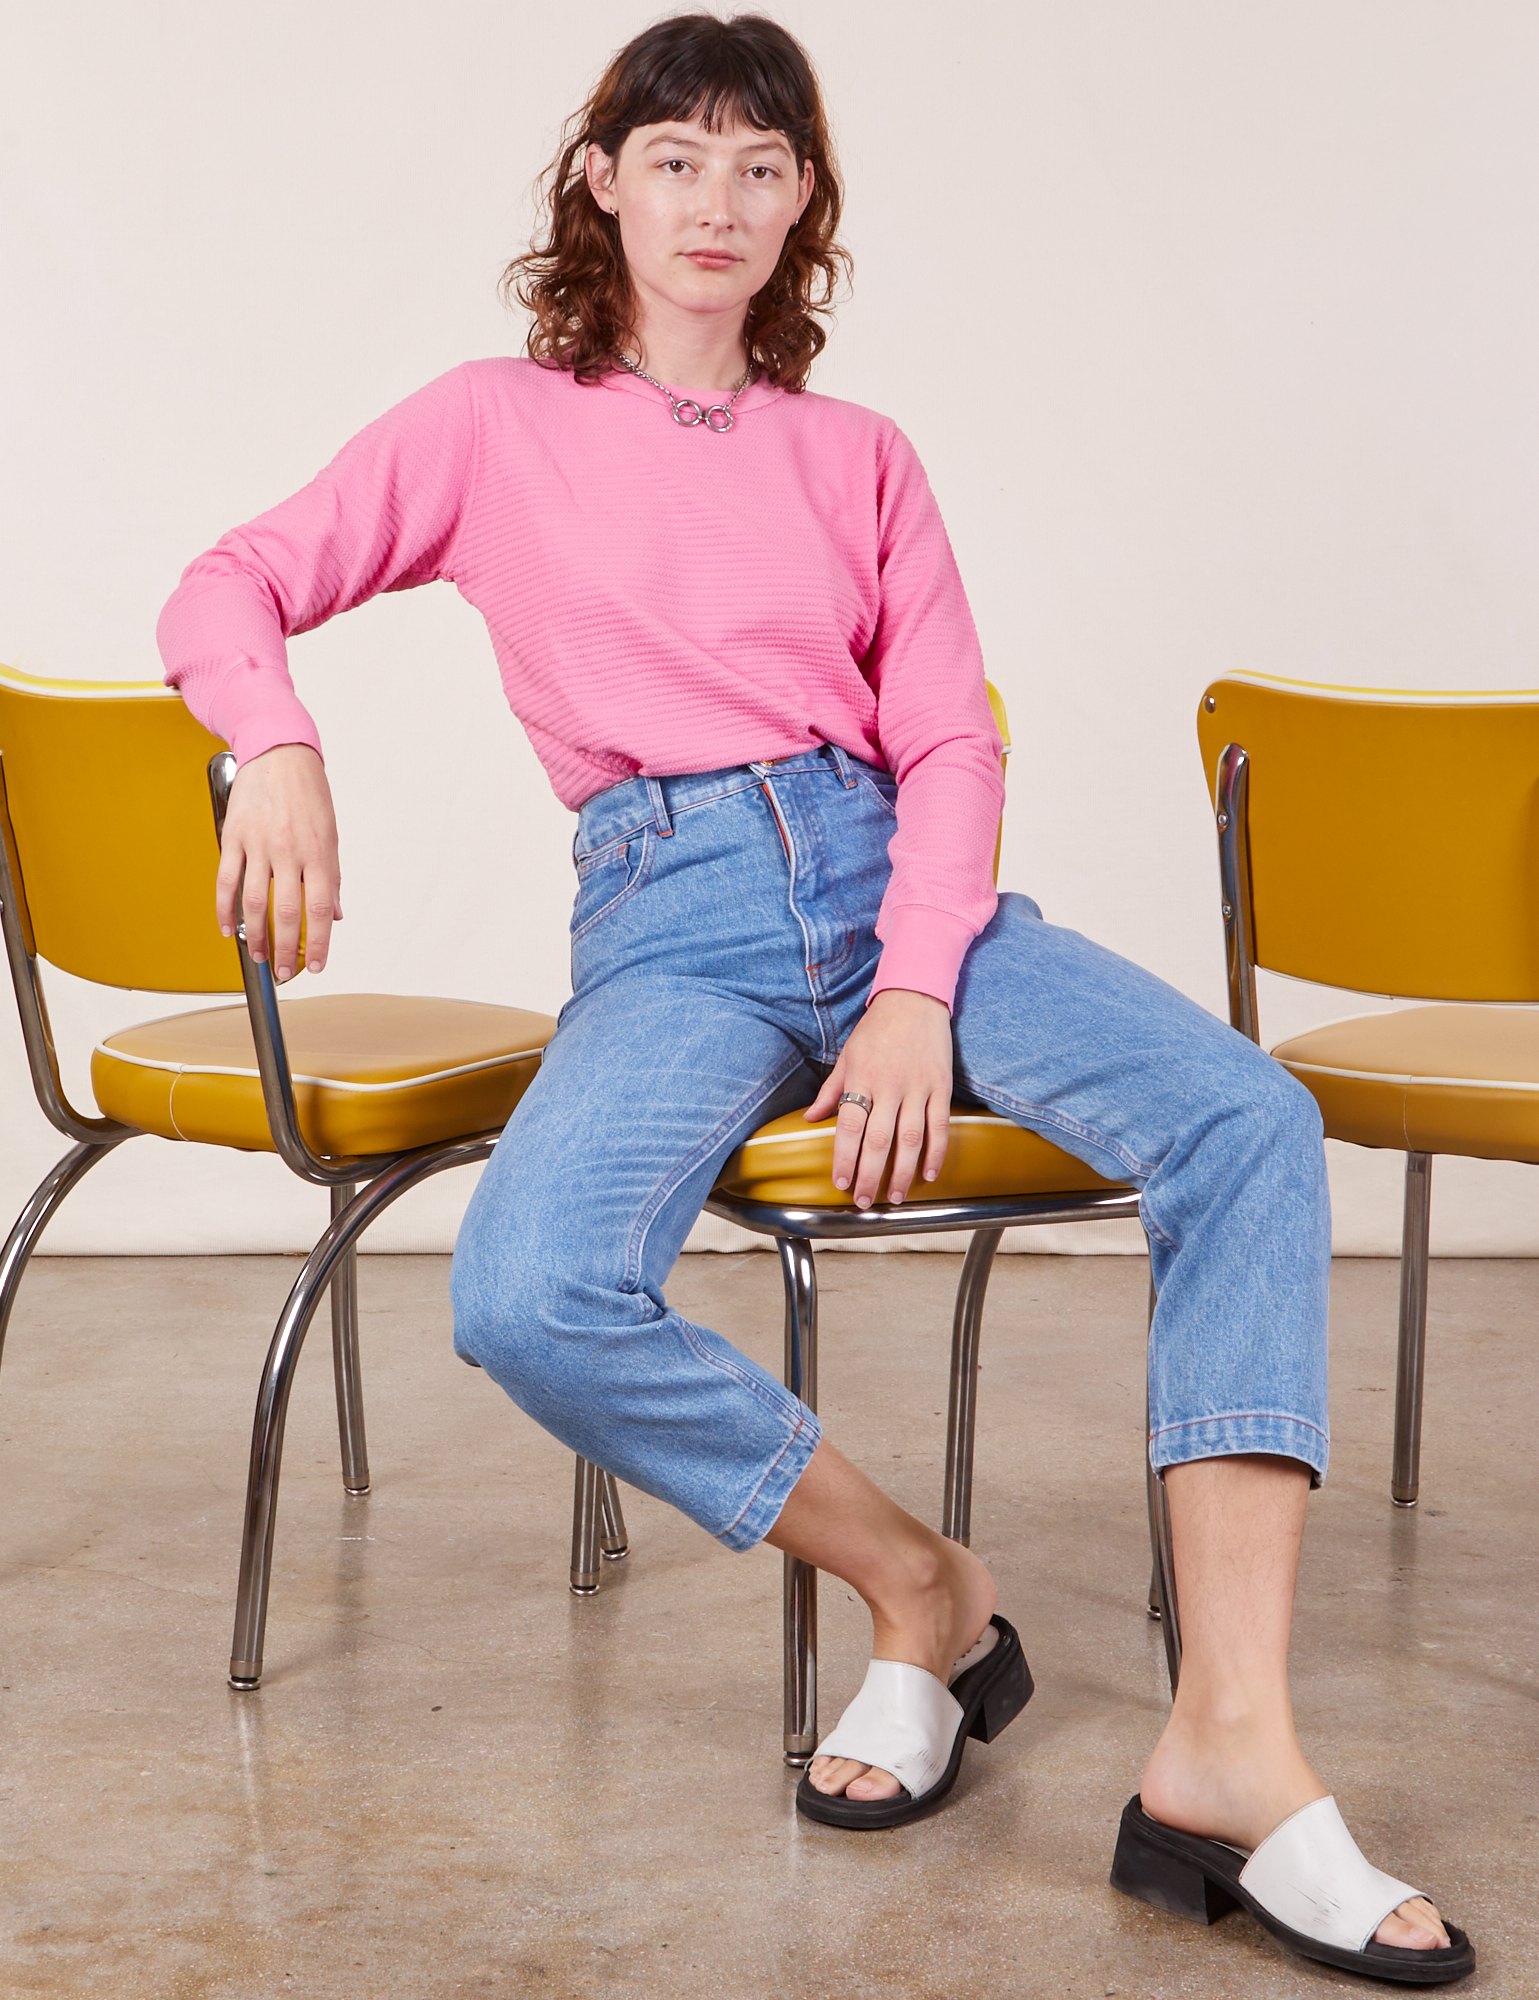 Alex is wearing Honeycomb Thermal in Bubblegum Pink and light wash Frontier Jeans